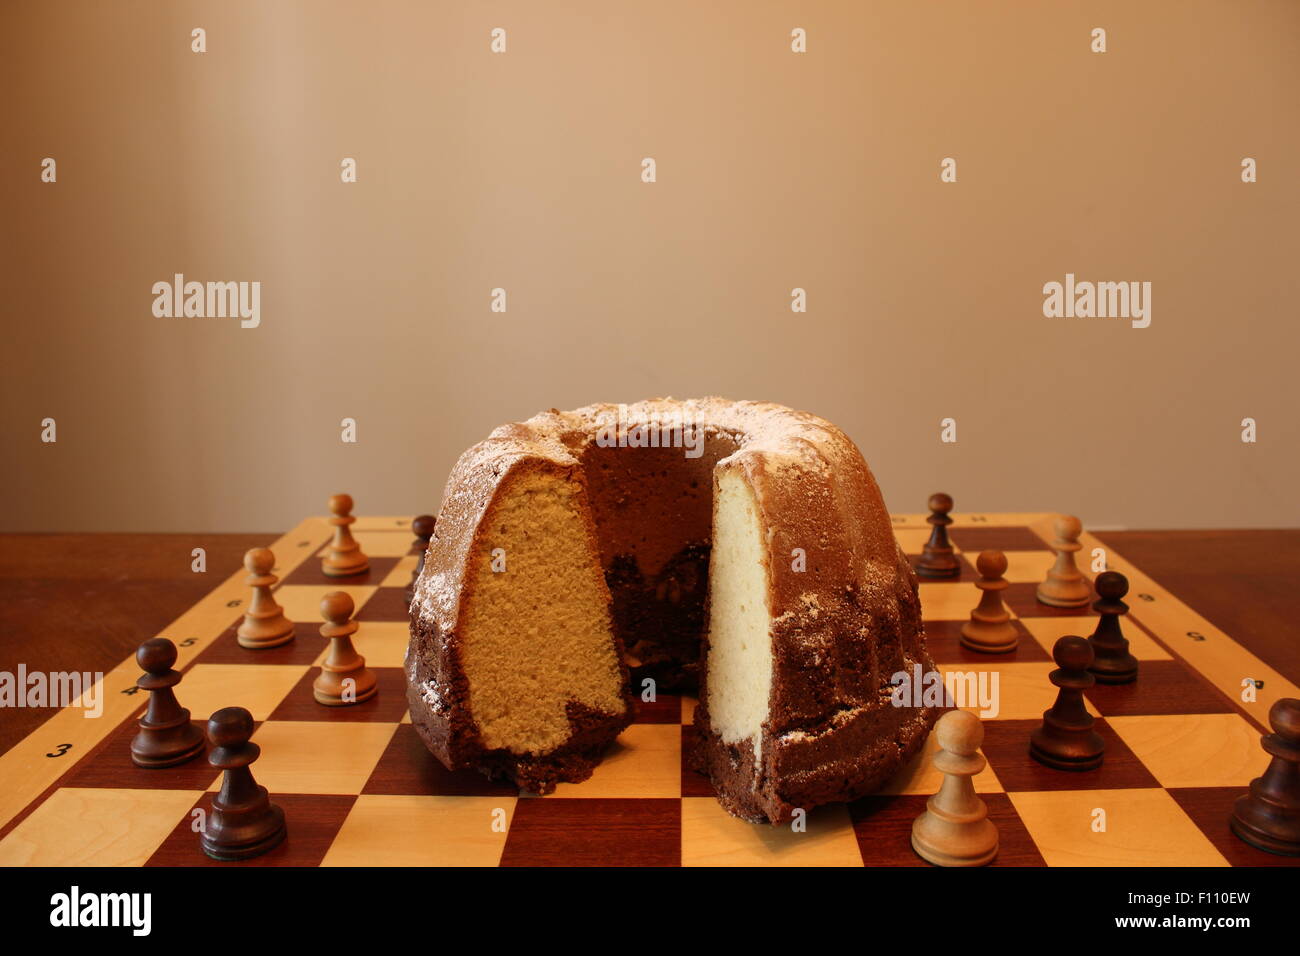 cake on chessboard surrounded by chessmen Stock Photo